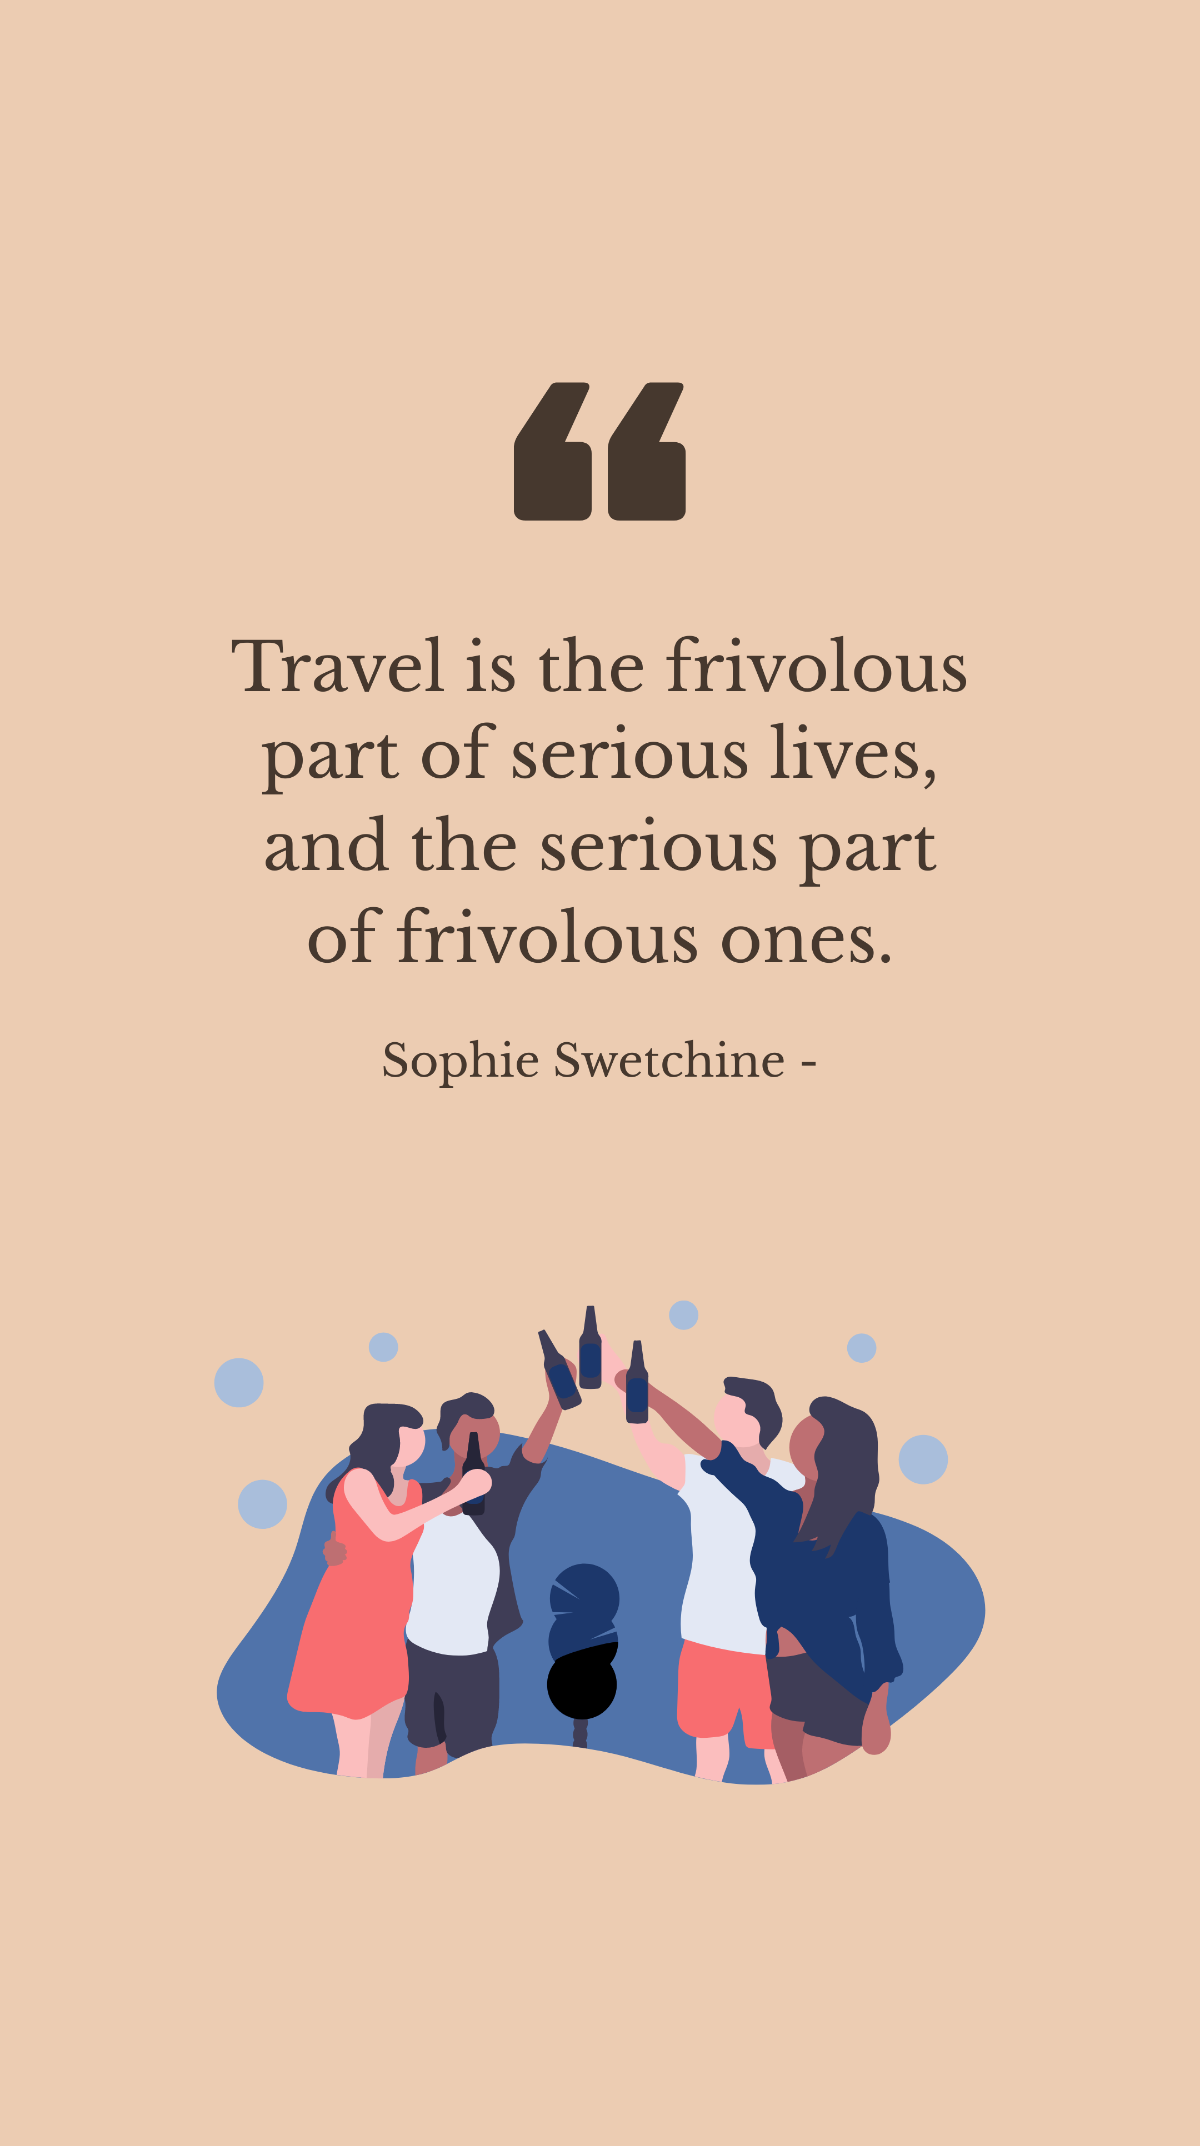 Sophie Swetchine - Travel is the frivolous part of serious lives, and the serious part of frivolous ones. Template